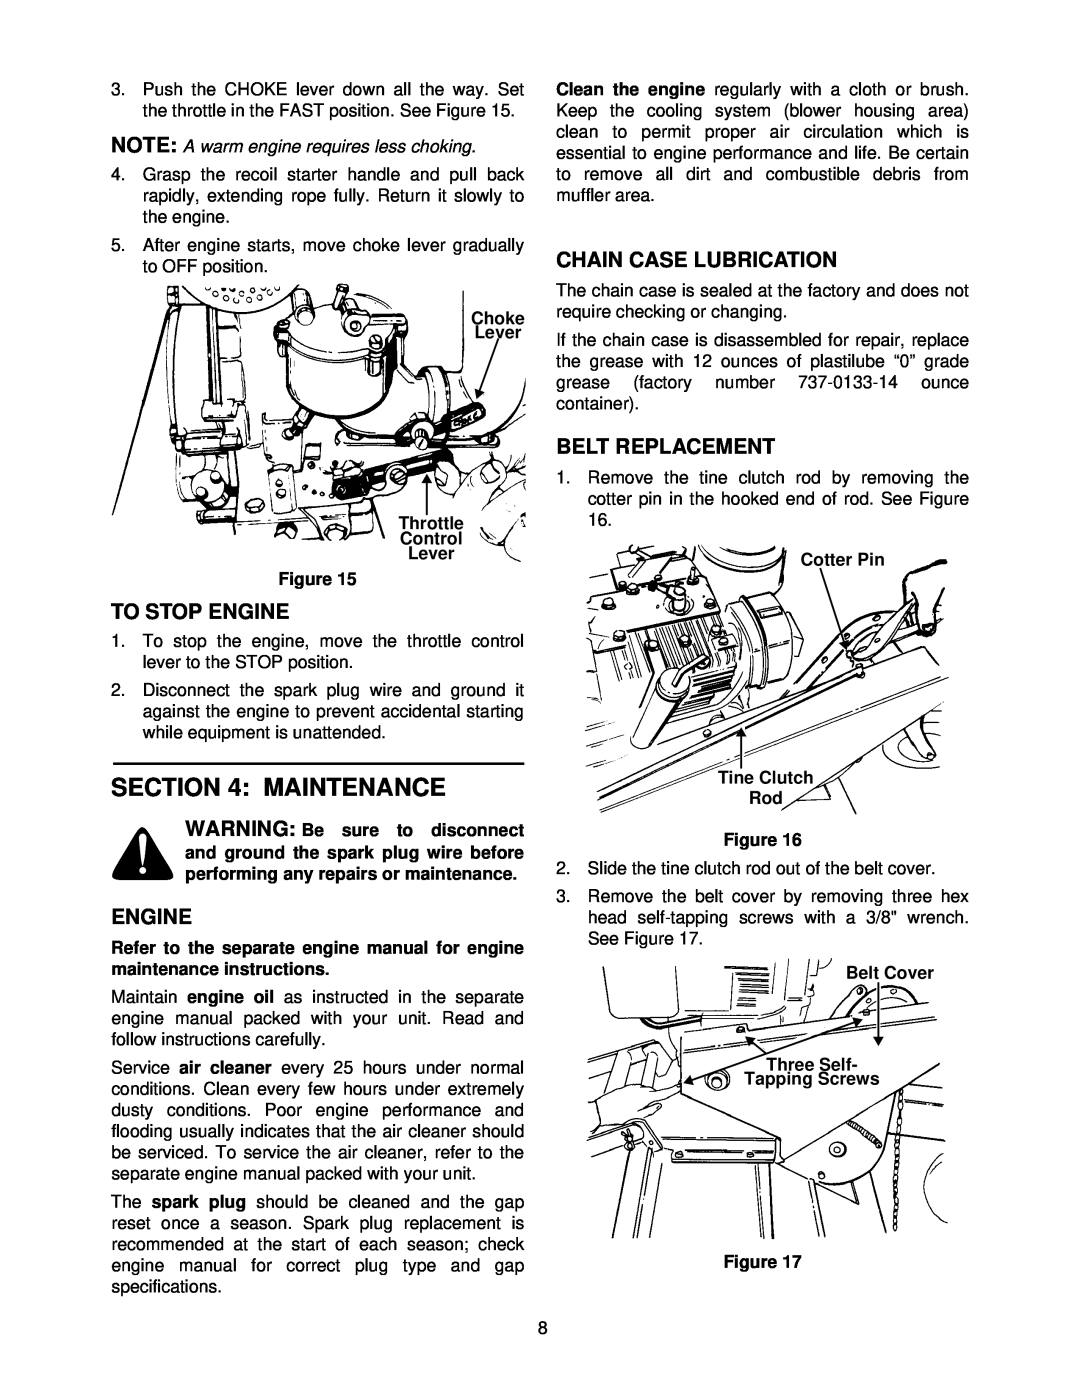 Bolens 190-758 manual Maintenance, To Stop Engine, Chain Case Lubrication, Belt Replacement 